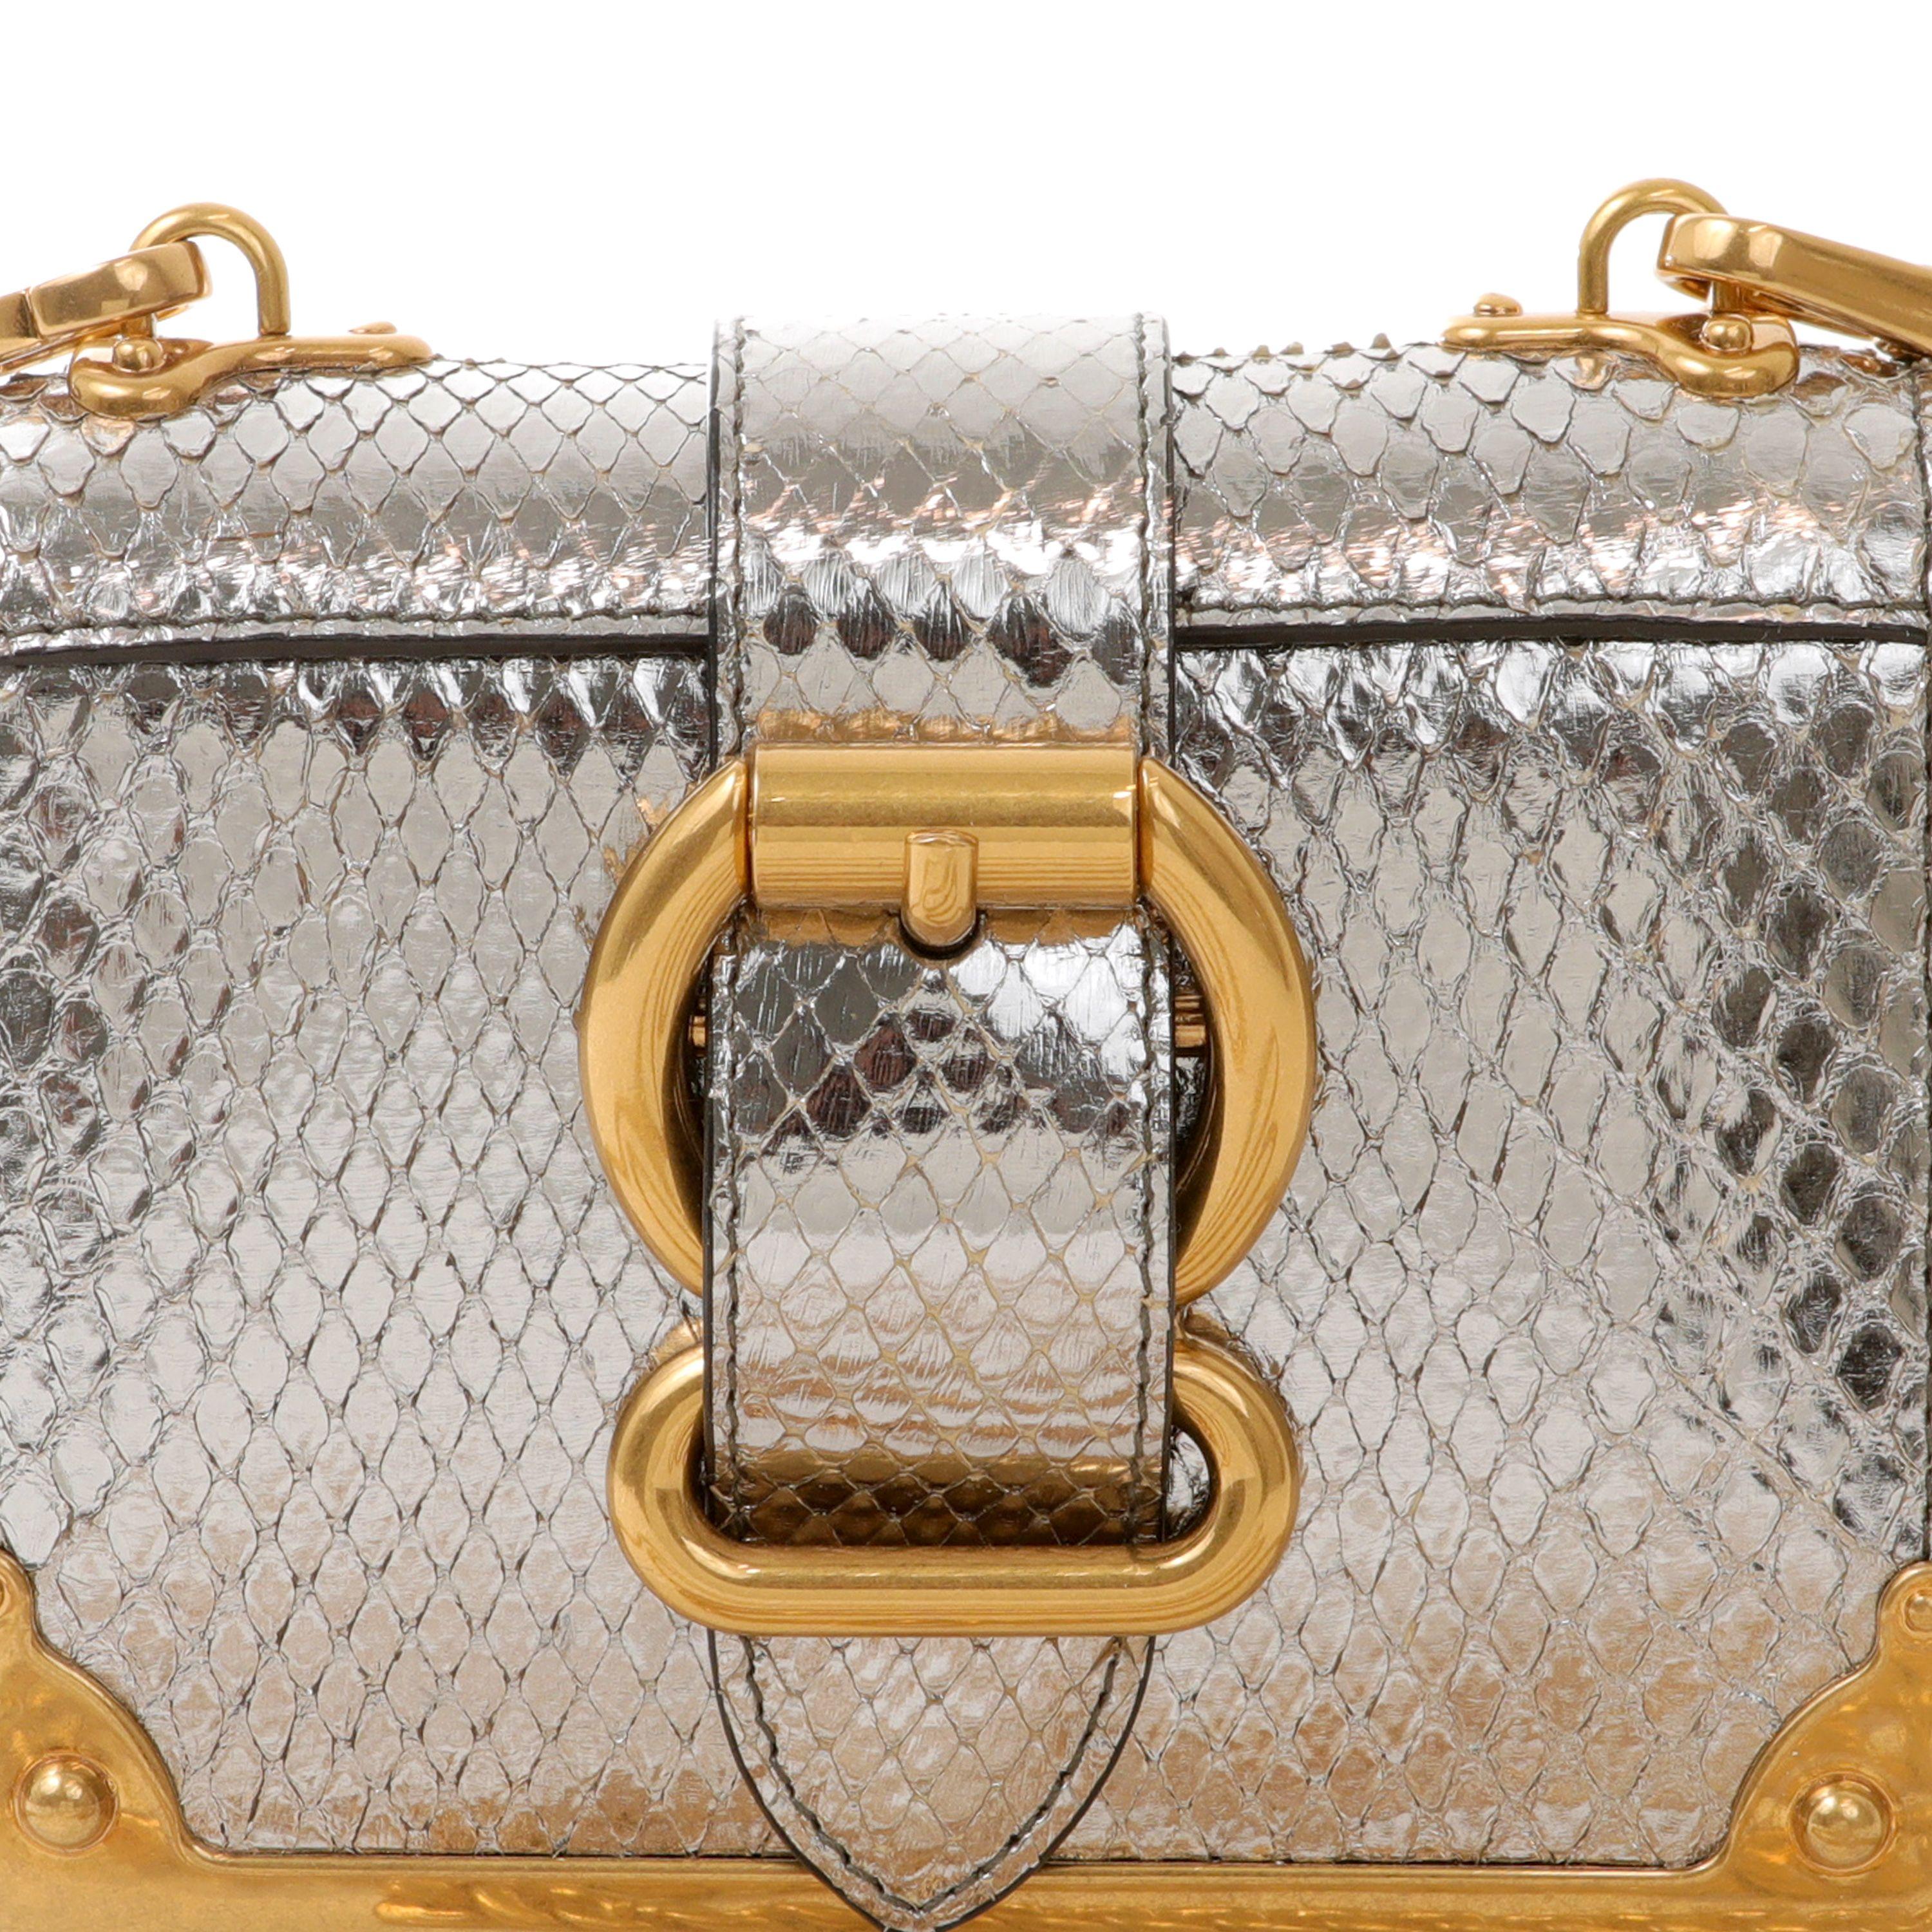 This authentic Prada Silver Lizard Micro Cahier Bag is in pristine condition.  Stunning exotic in mixed metallics; silver lizard skin with gold hardware.  Long gold tone chain strap. Dust bag included.

PBF 13768